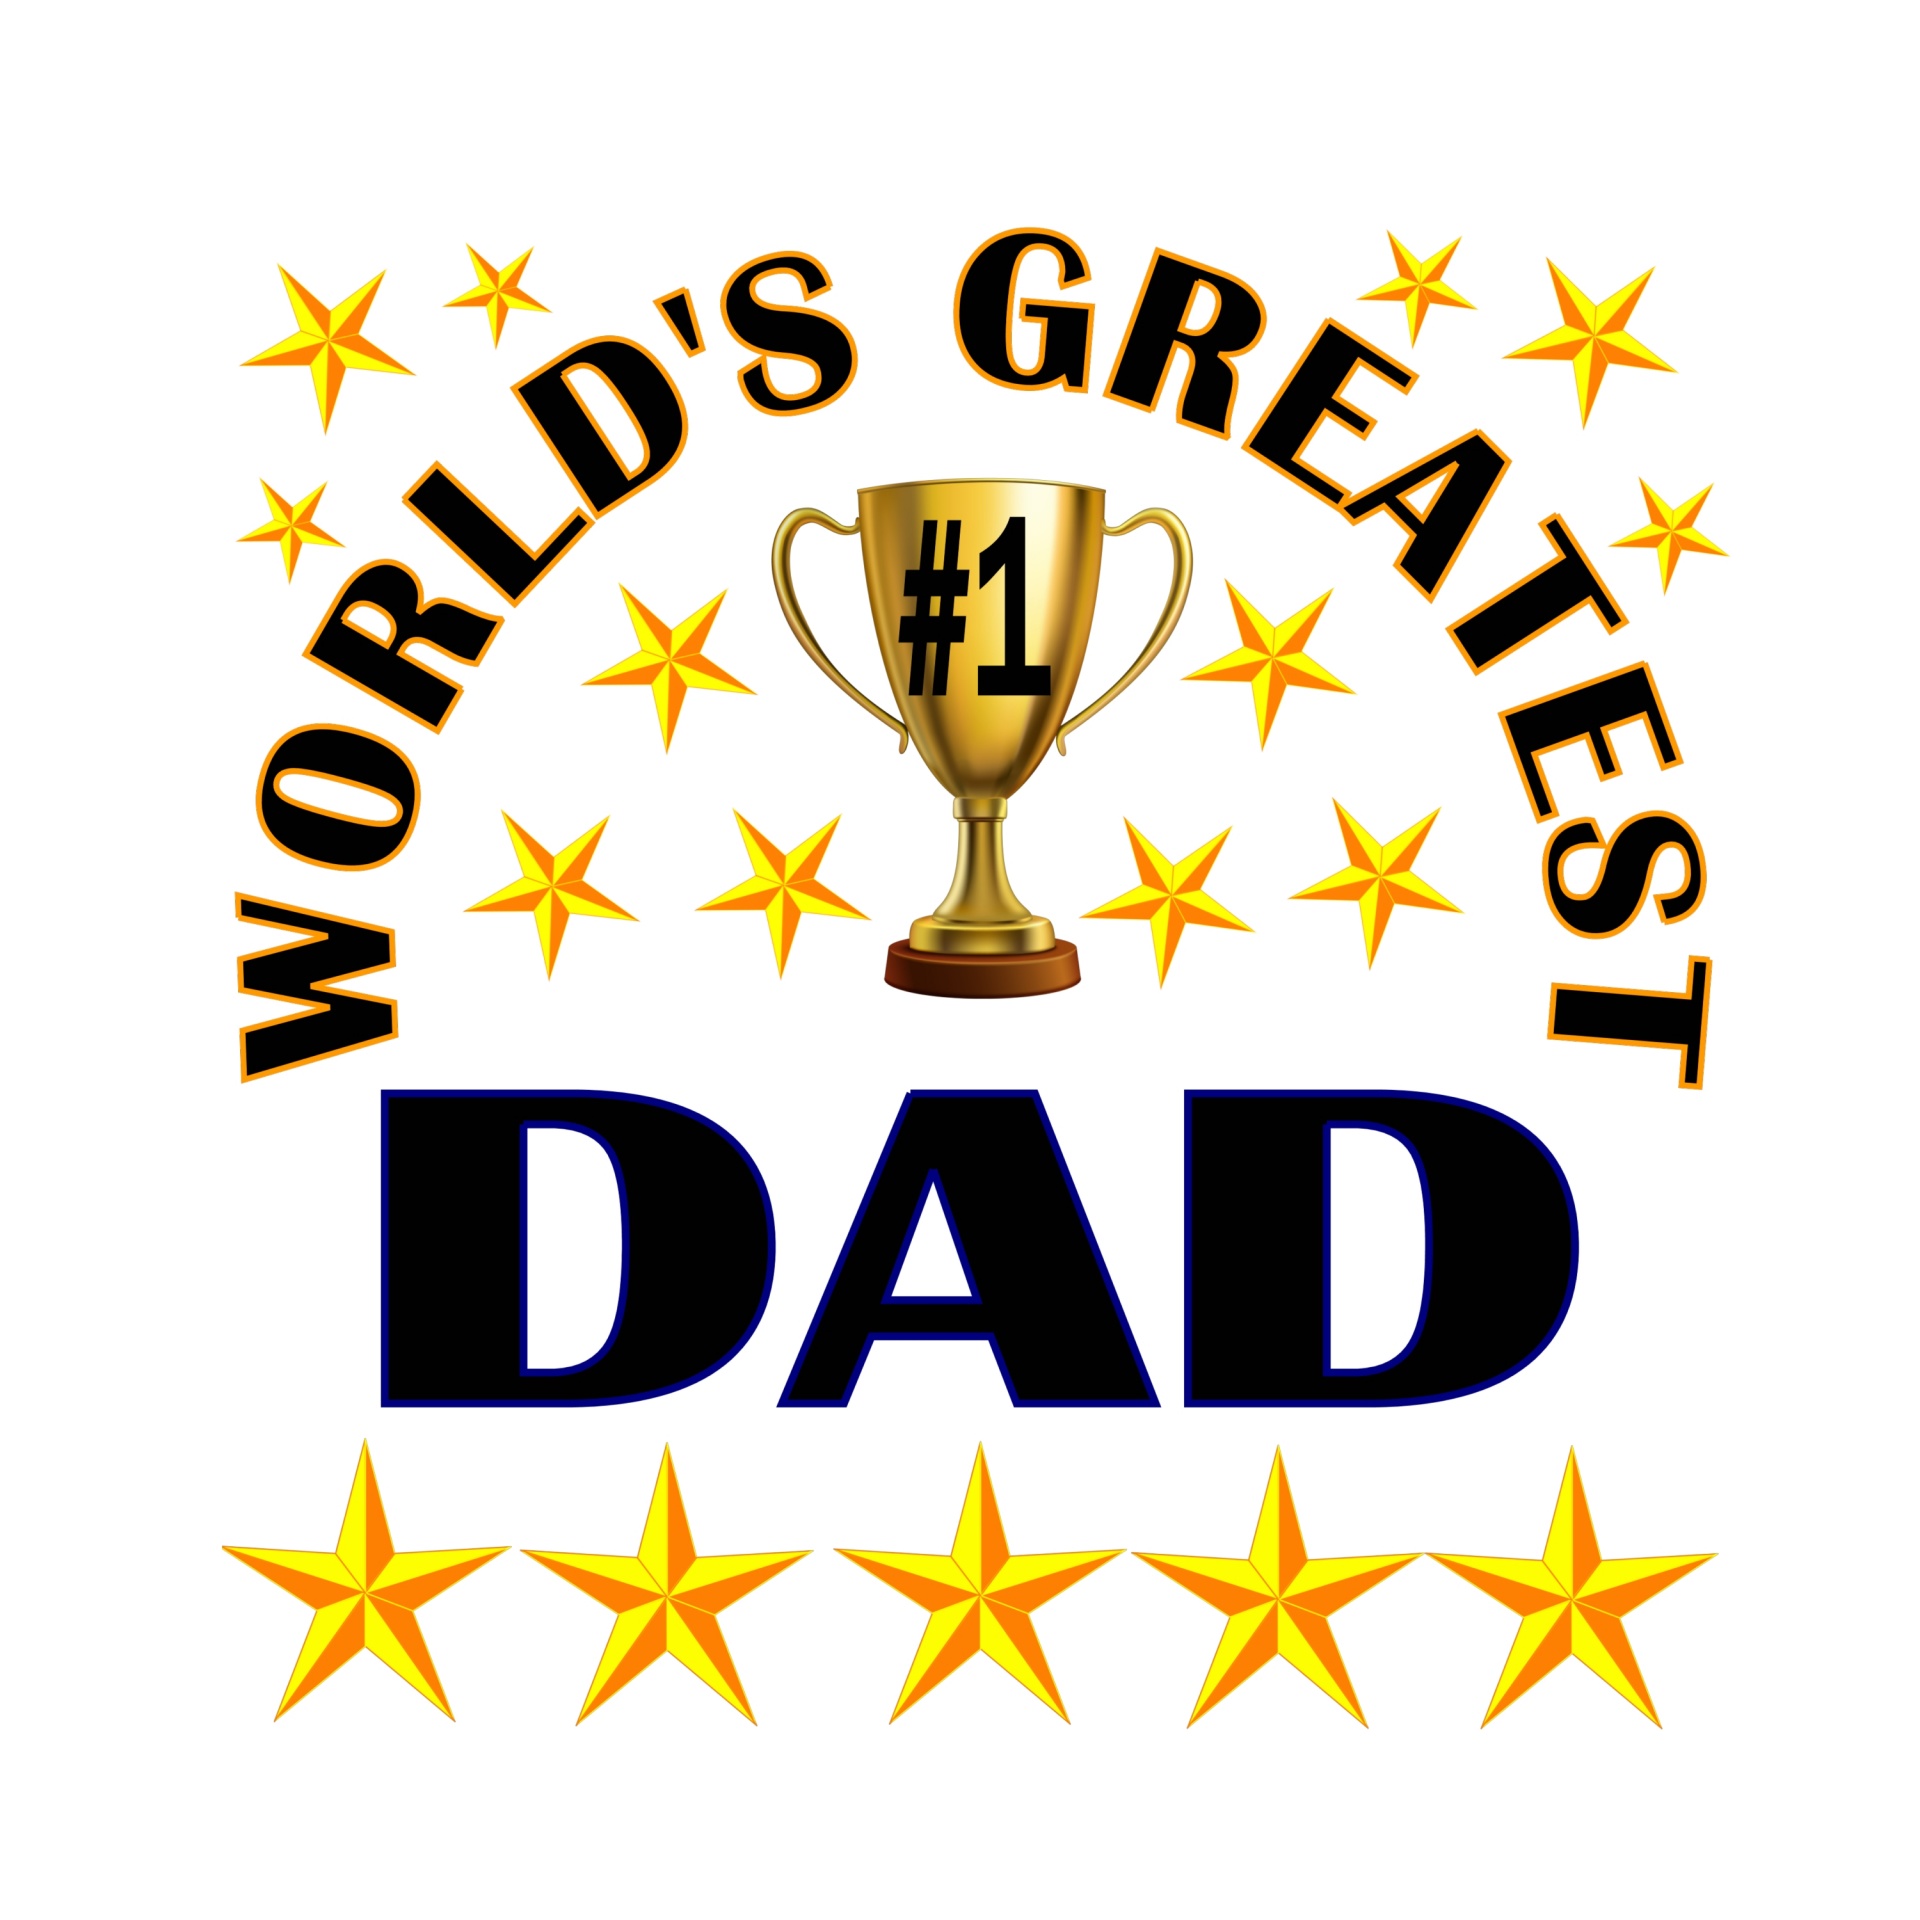 World's greatest dad,dad,father,stars,trophy - free image from needpix.com